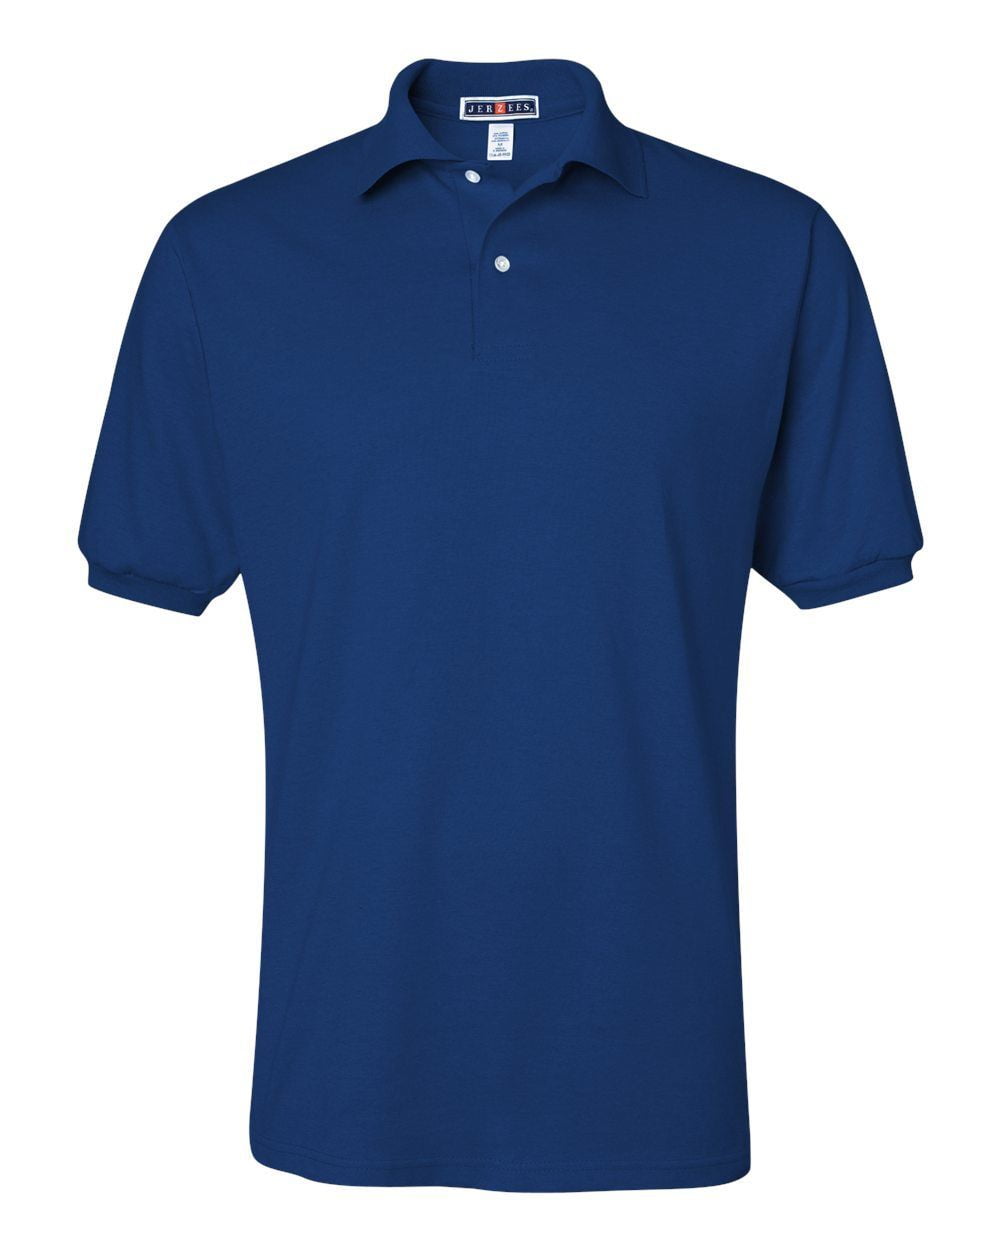 Mens Jersey Sport Polo Shirt 50/50 Sport Tee Outfit Color Royal Blue 3X ...